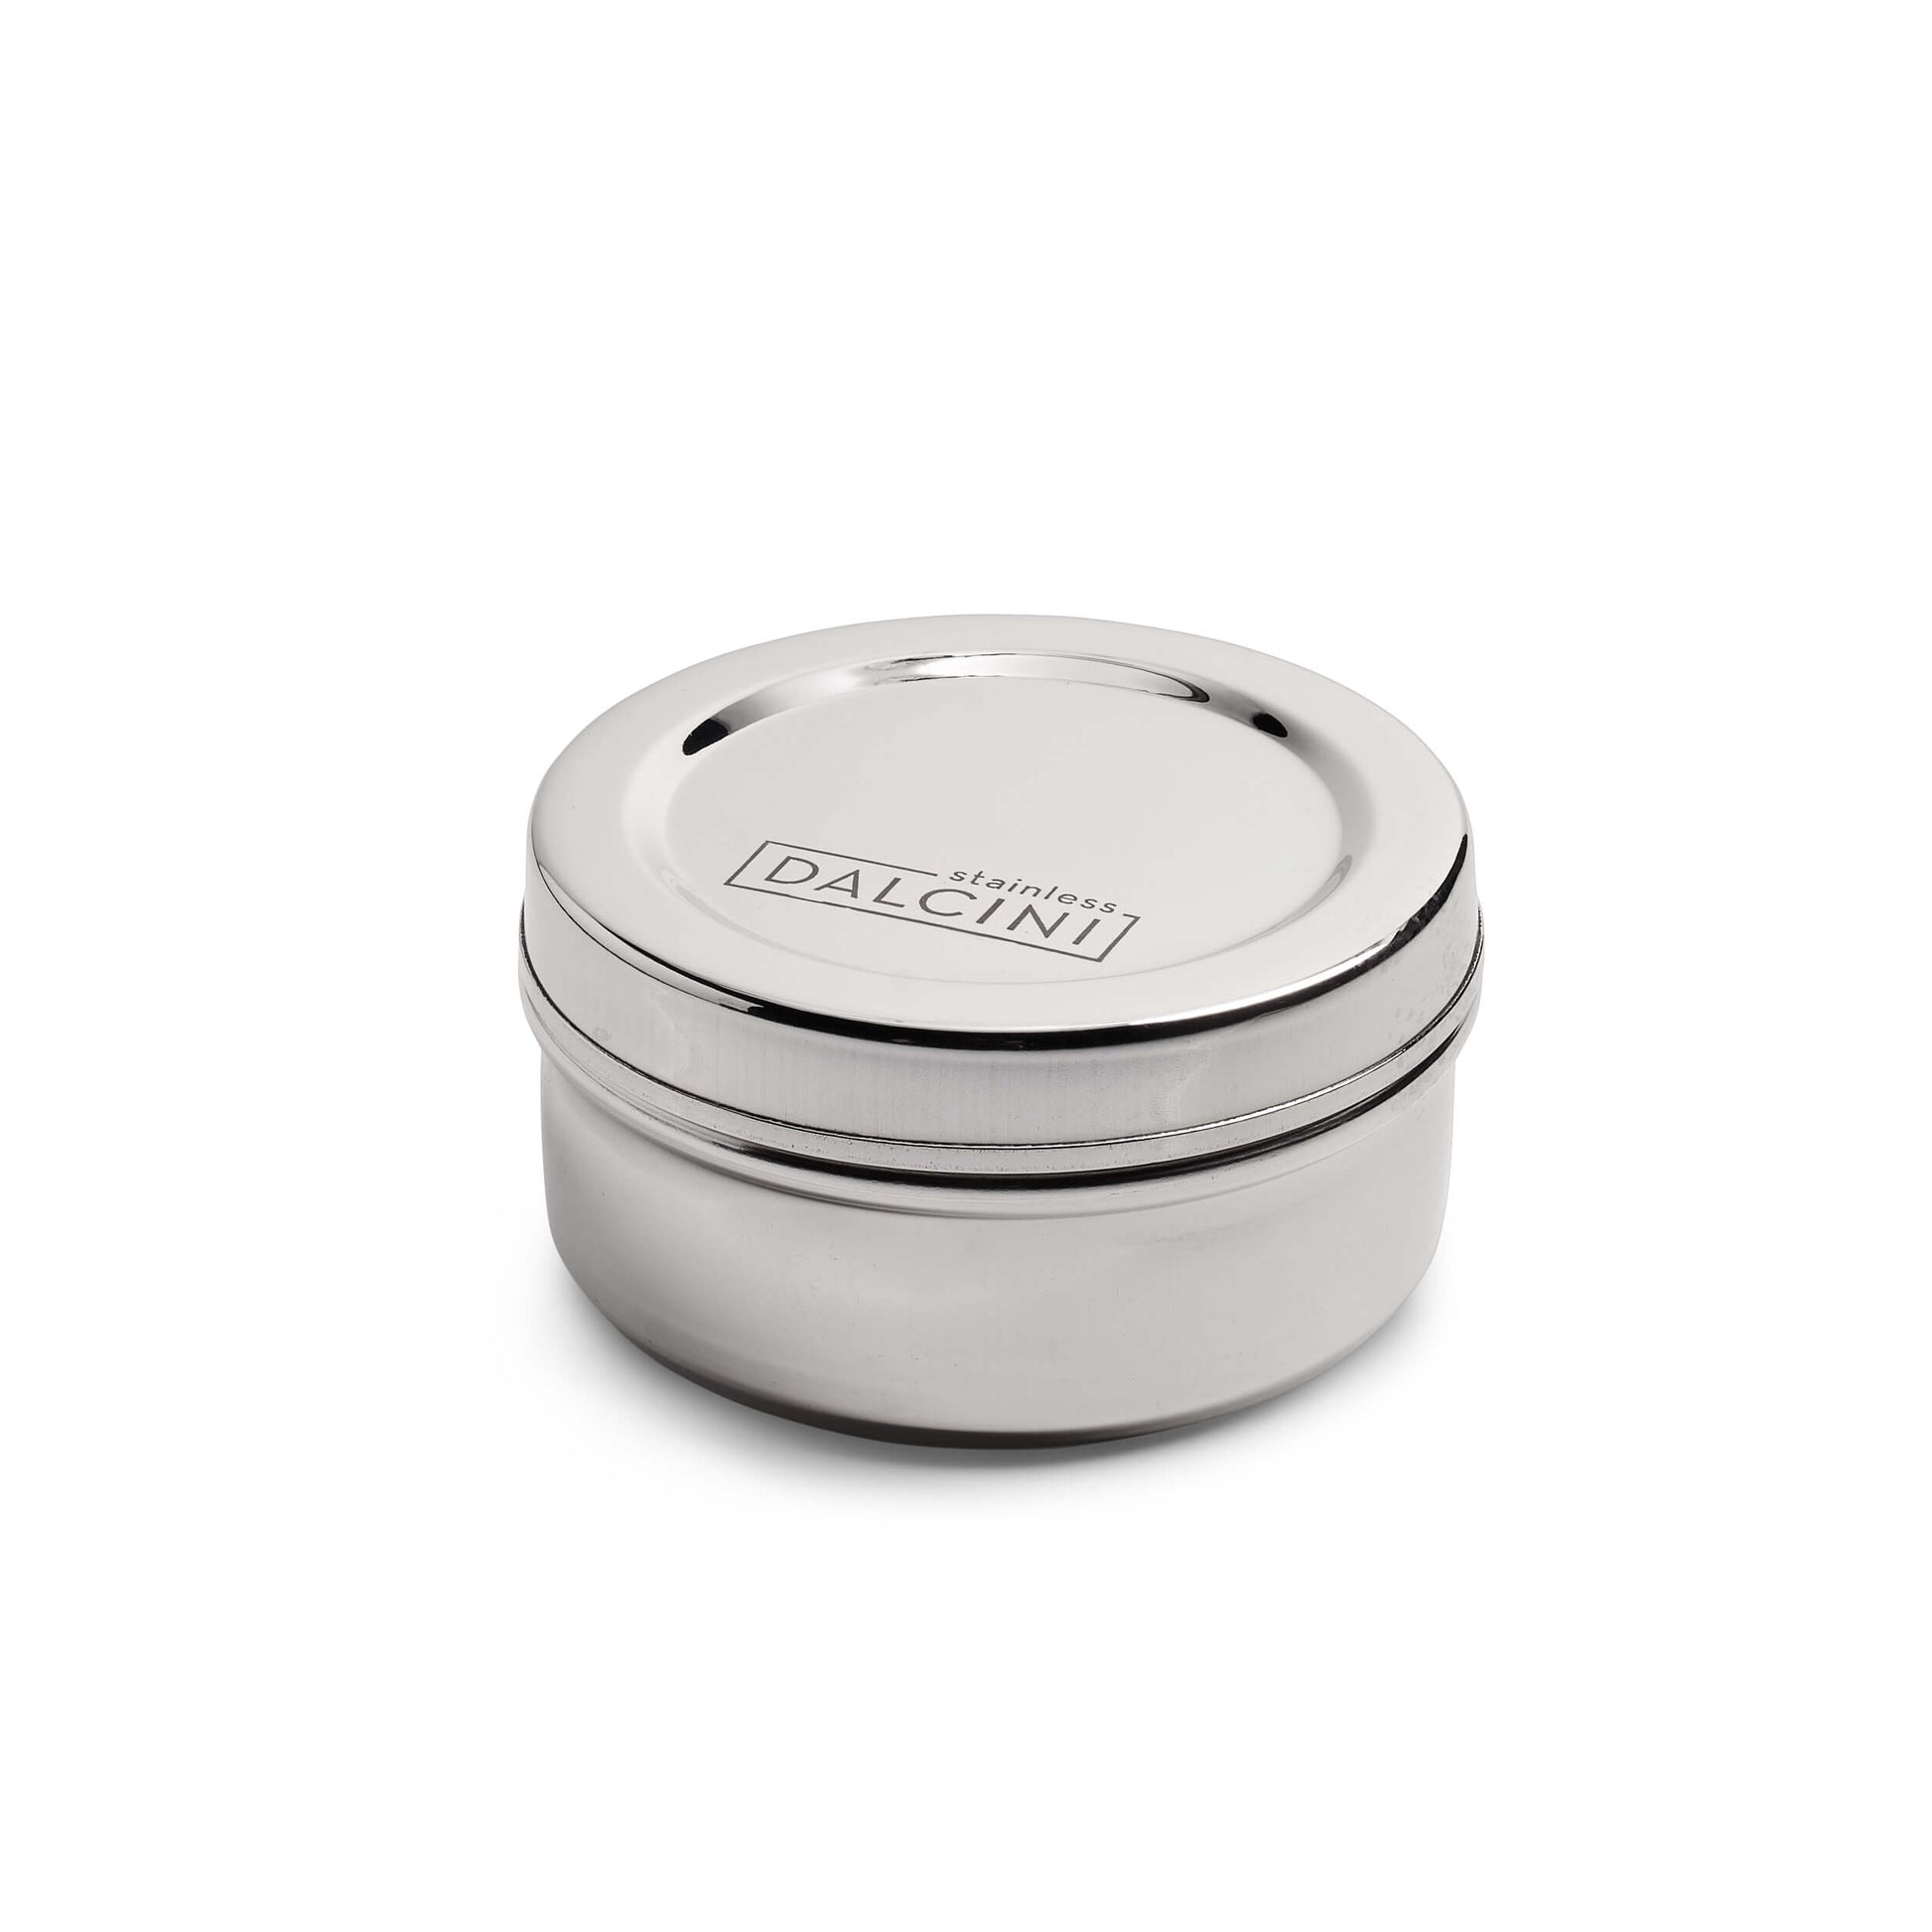 Round stainless steel snack box with closed lid